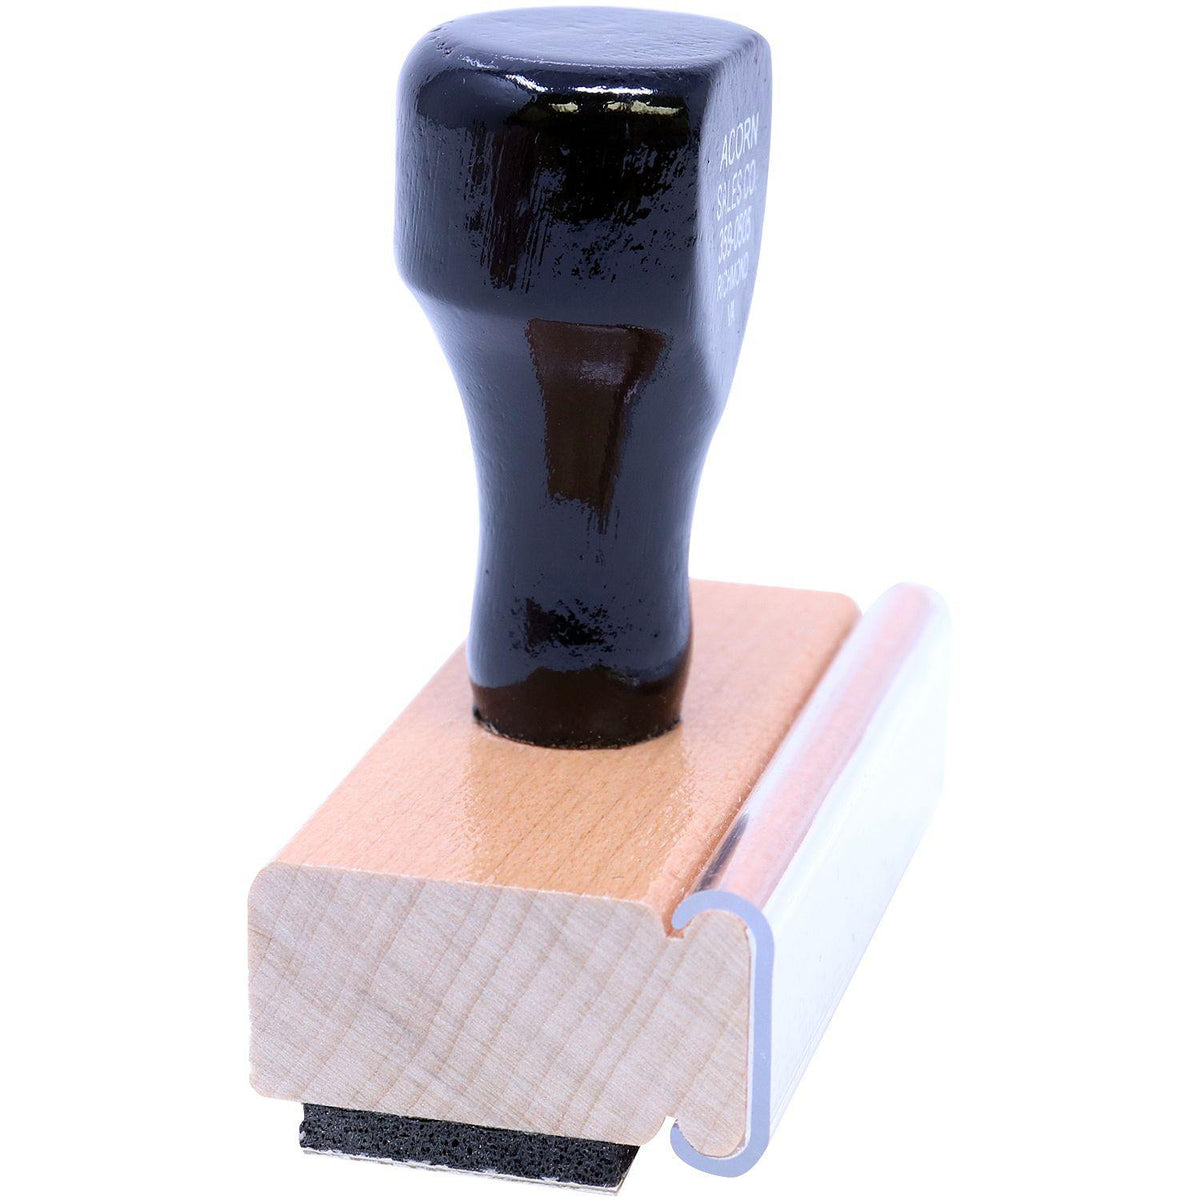 Side View of Large Narrow Font Urgent Rubber Stamp at an Angle